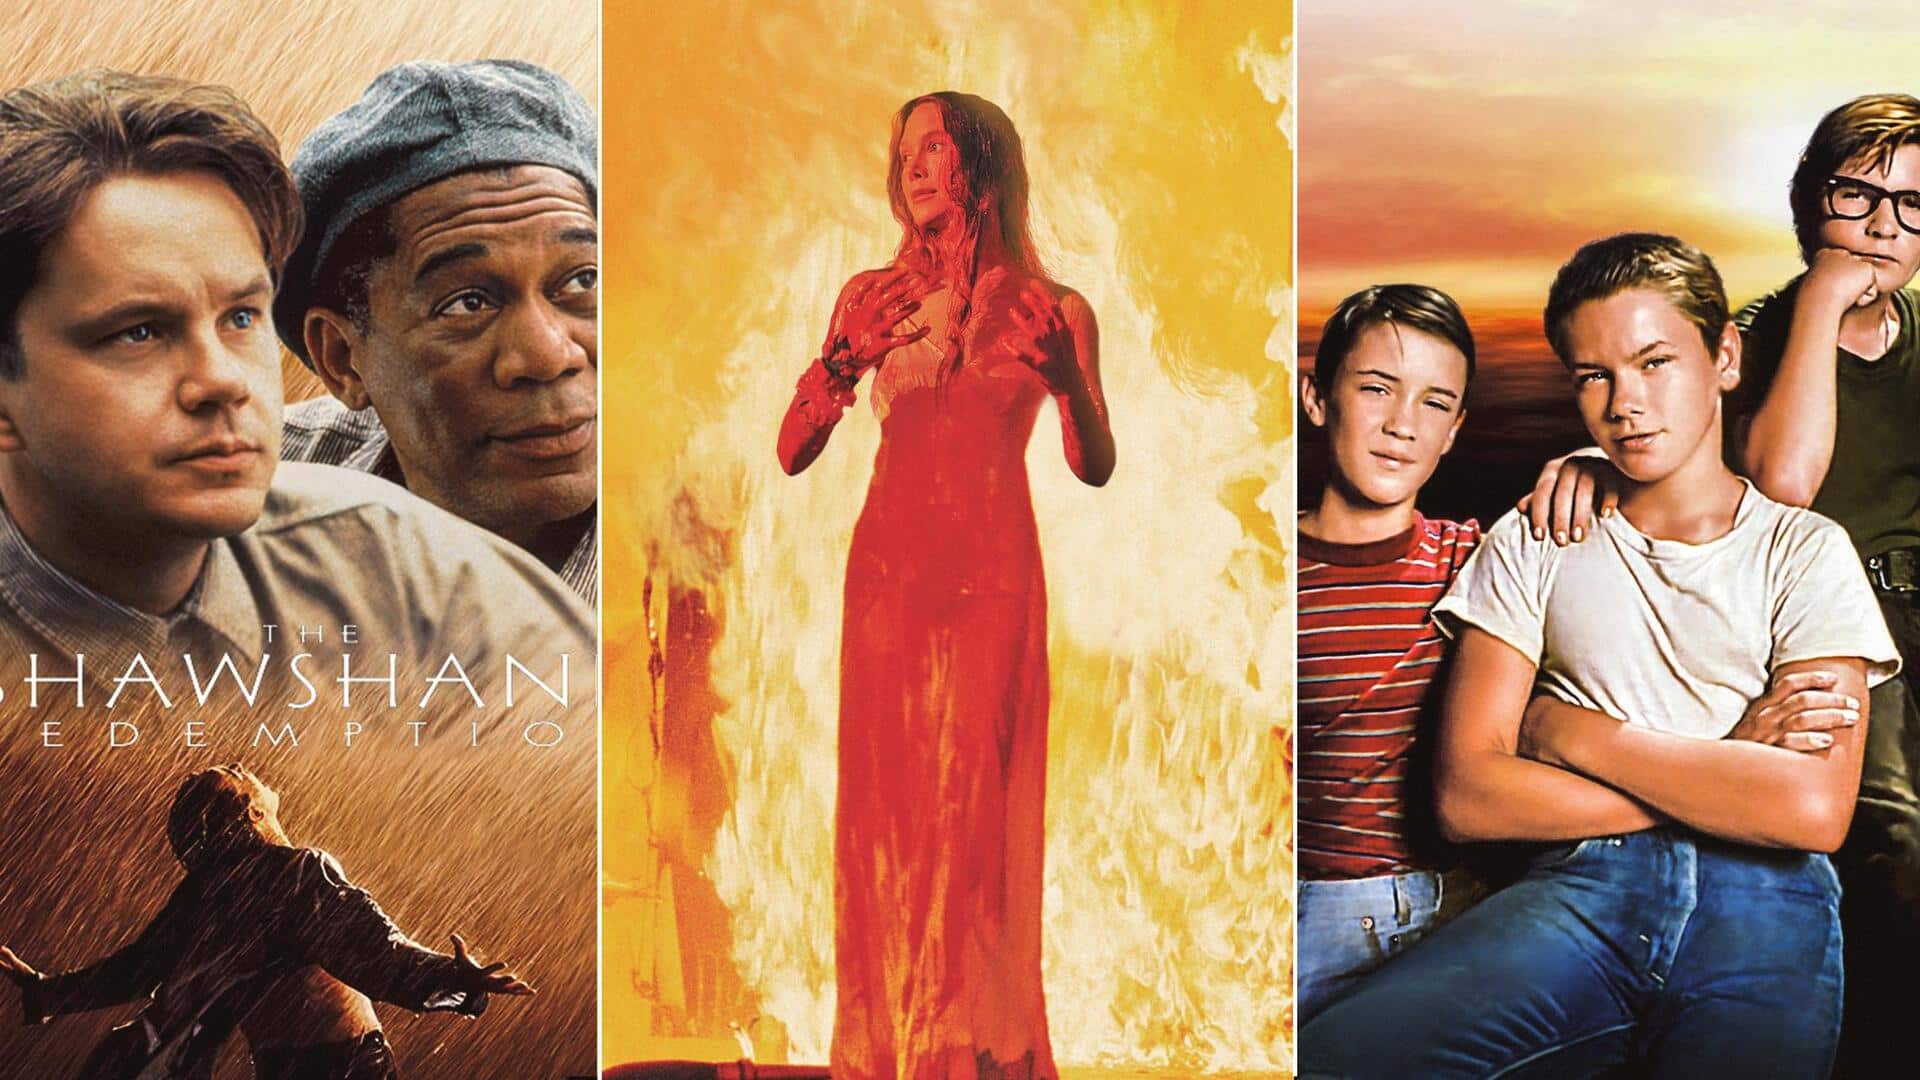 'Carrie,' 'The Shawshank Redemption': Best Stephen King books' Hollywood adaptations 